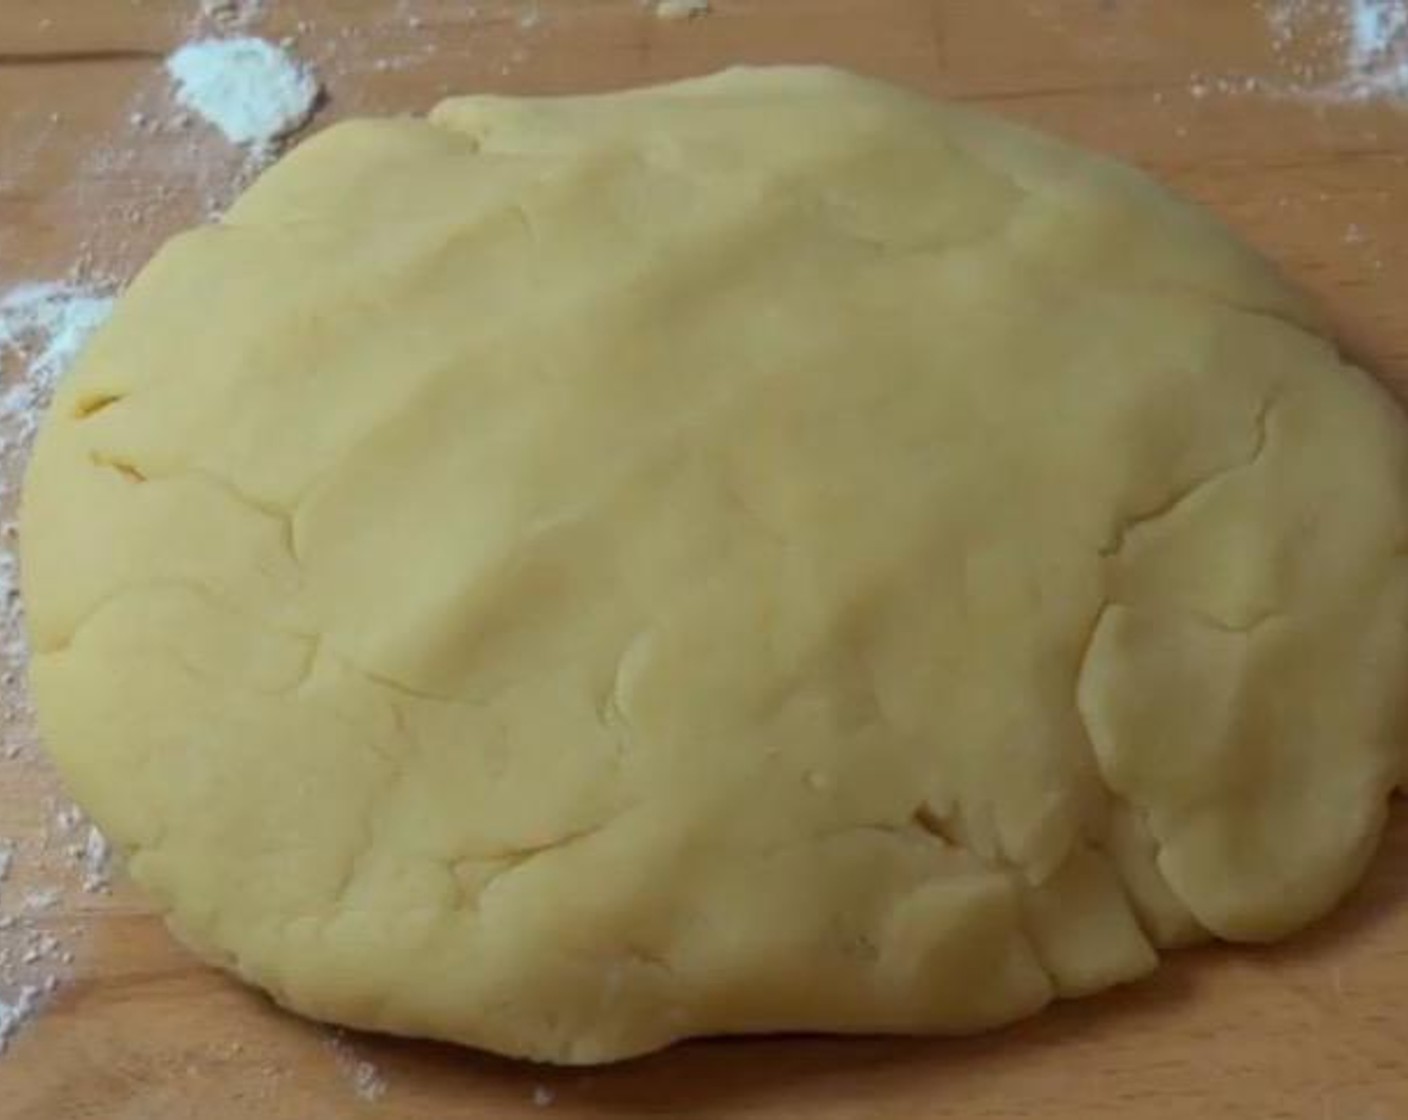 step 3 Lightly knead the dough on a floured surface until smooth. Form into a rough disk shape, cover with plastic wrap and chill in fridge for 1 hour.